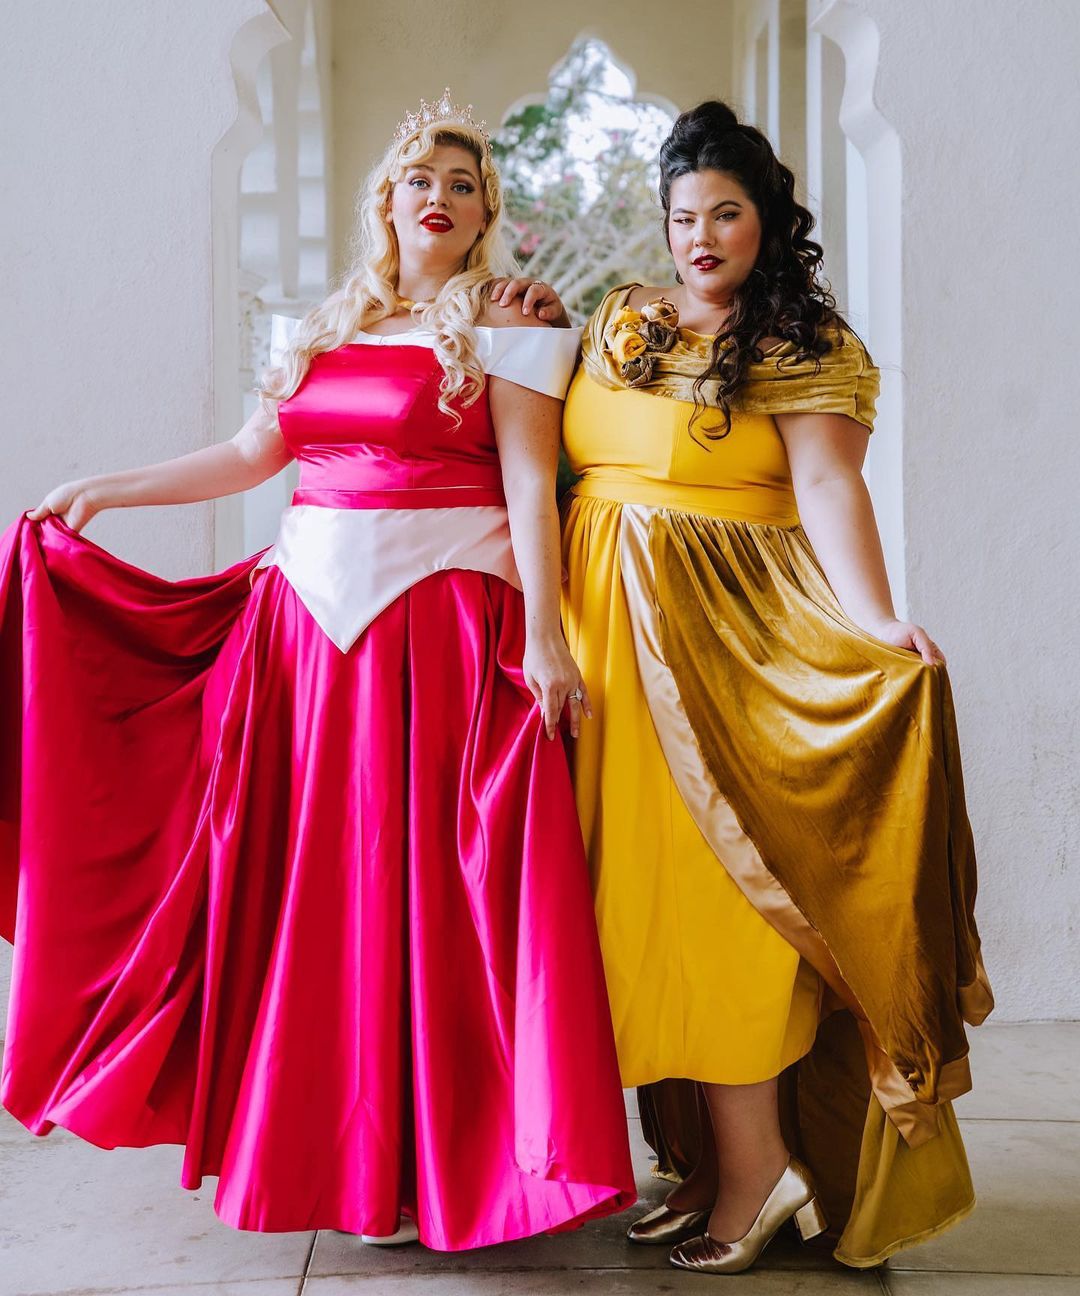 The project aims to showcase diversity and inclusivity among Disney princesses, highlighting that it's achievable regardless of body type, skin color, or background.